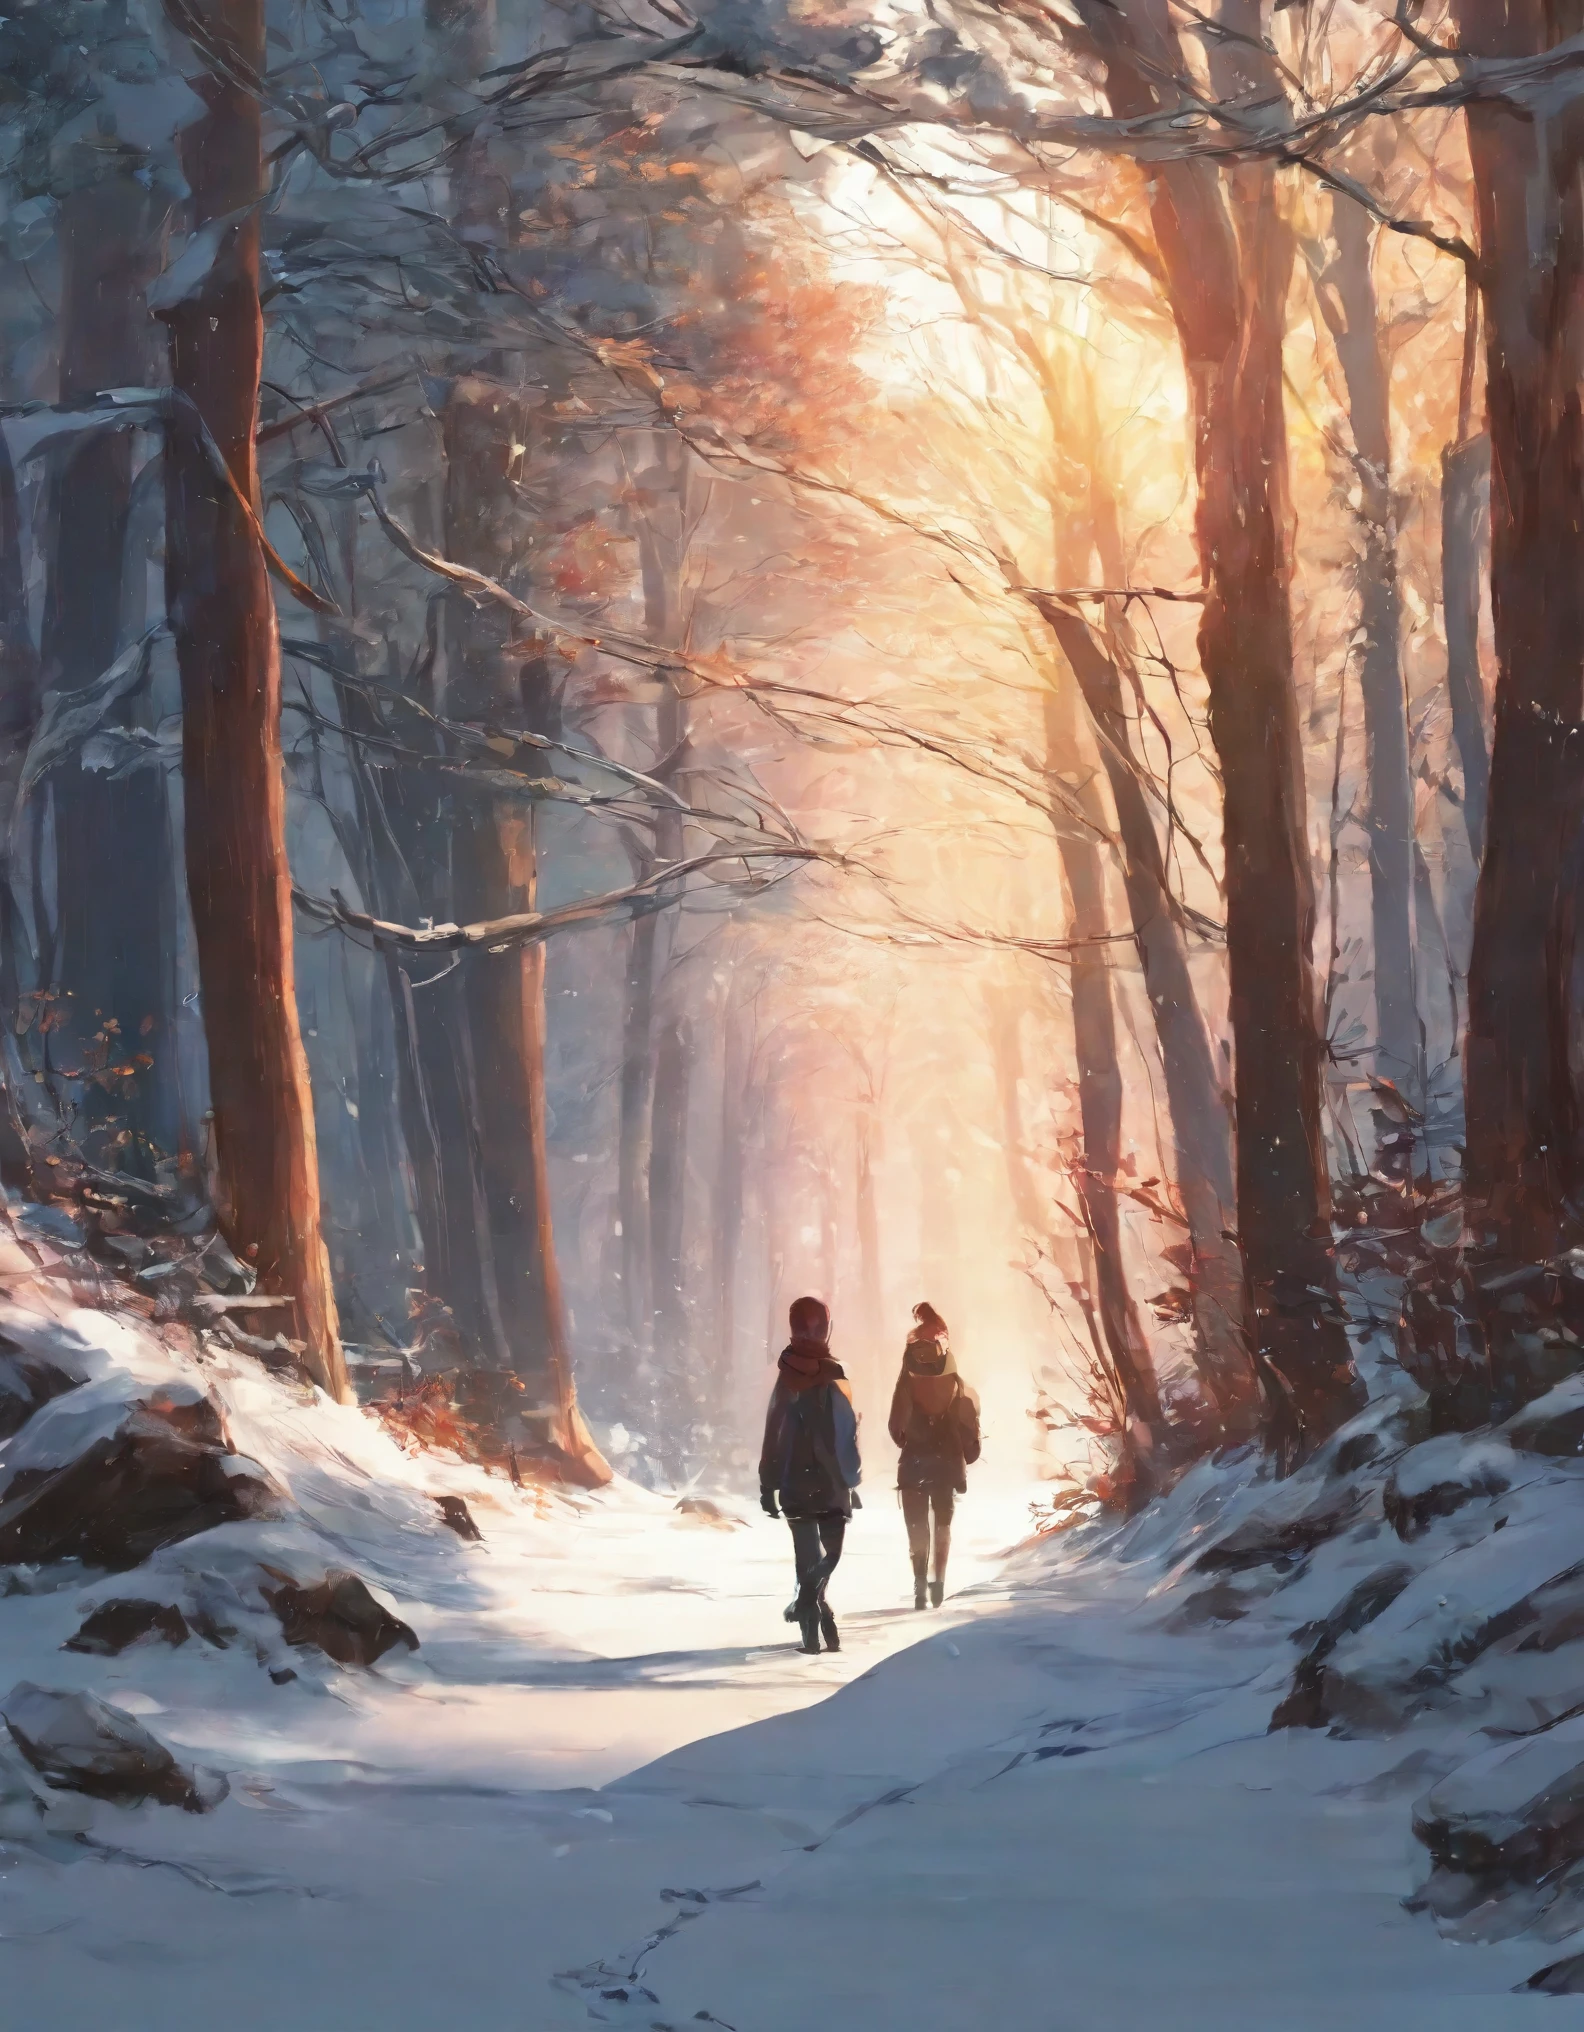 a close up of a person walking on a snowy path in the woods, snowy. by makoto shinkai, ross tran. scenic background, beautiful anime scene, by sylvain sarrailh, winter concept art, beautiful anime scenery, beautiful concept art, anime nature, anime nature wallpap, snow forest, environment art, cold colors. insanely detailed